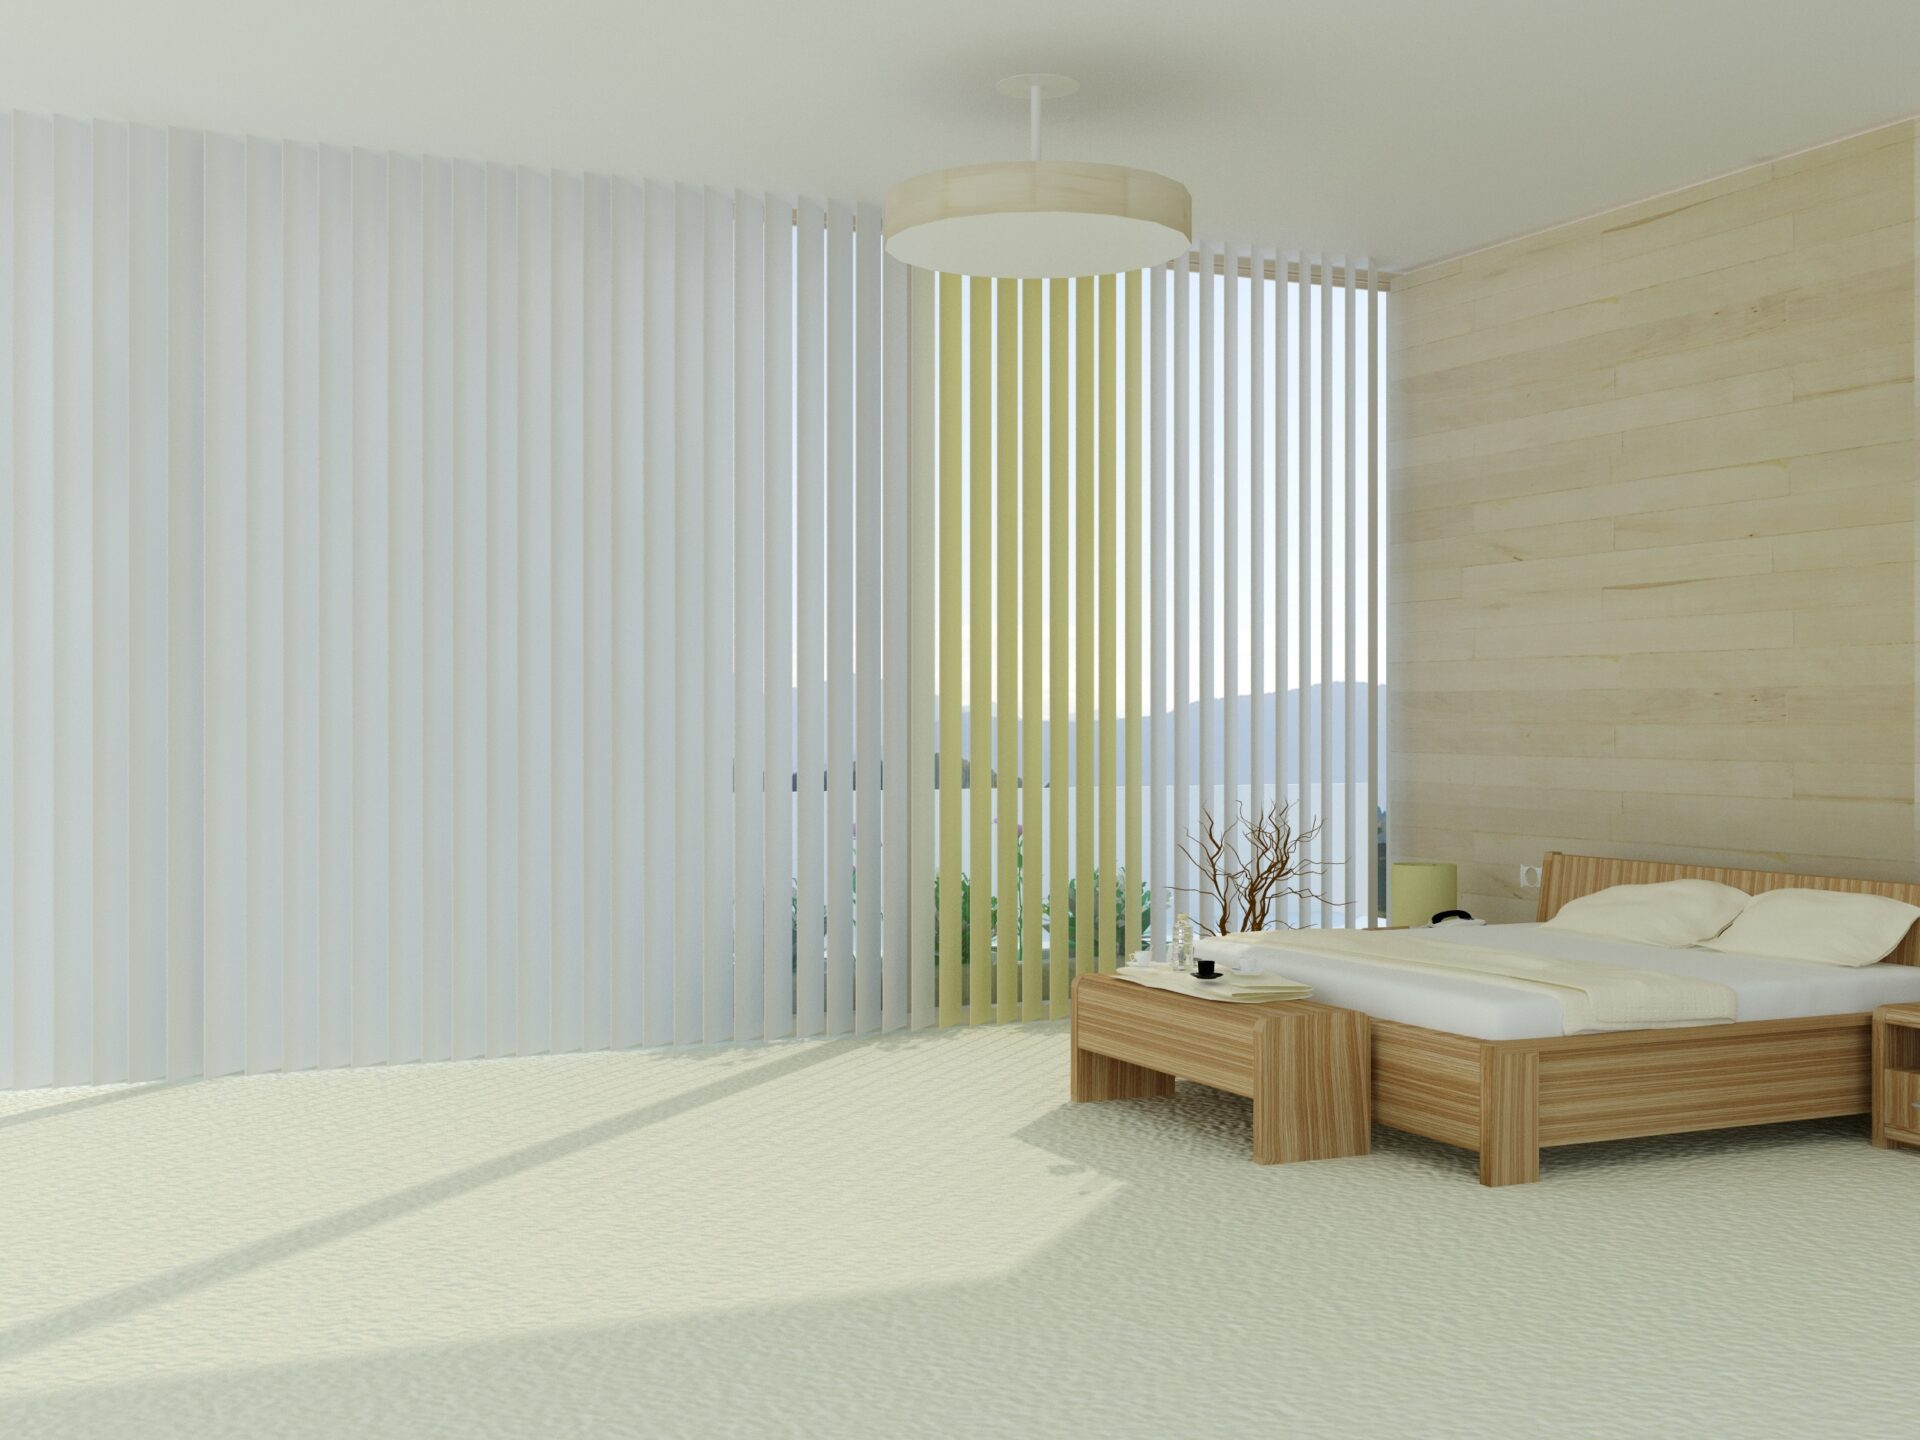 Vertical blinds in a bedroom. Custom blinds for any window. Wholesale Blind Factory.